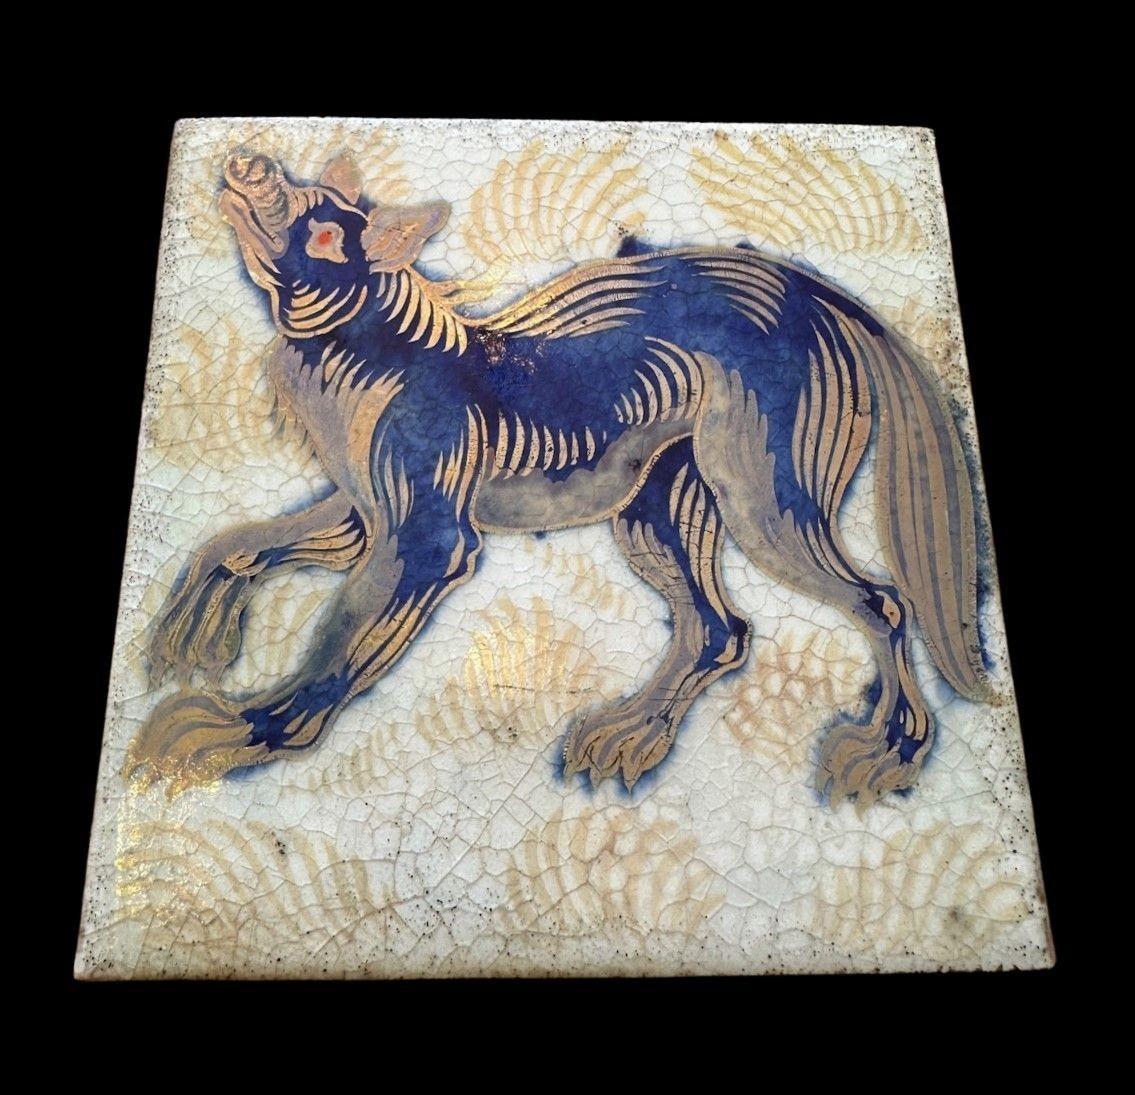 5514
William De Morgan Tripple Lustre Tile decorated with a “Howling Wolf” design
15.3cm x 15.5cm
1898
Provenance:
Purchased by the Earl of Balfor (UK Prime Minister 1902 - 1905) directly from William De Morgan, thence by descent
Light scratches